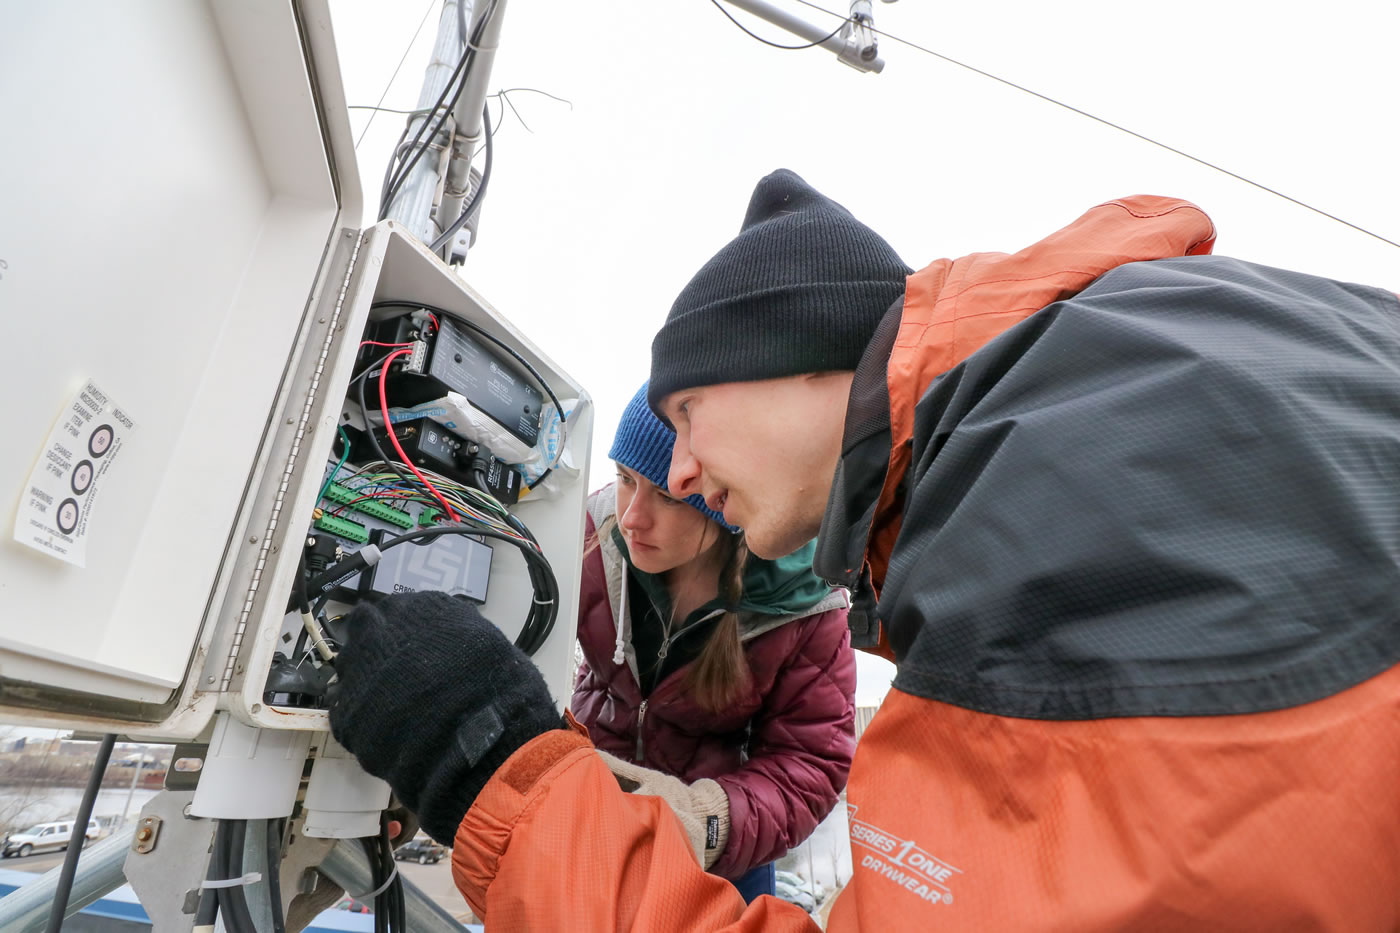 MWMO Water Resources Specialist Jen Keville and Environmental Specialist Brain Jastram work to repair the weather station on the roof of the MWMO Stormwater Park and Learning Center in March 2016.